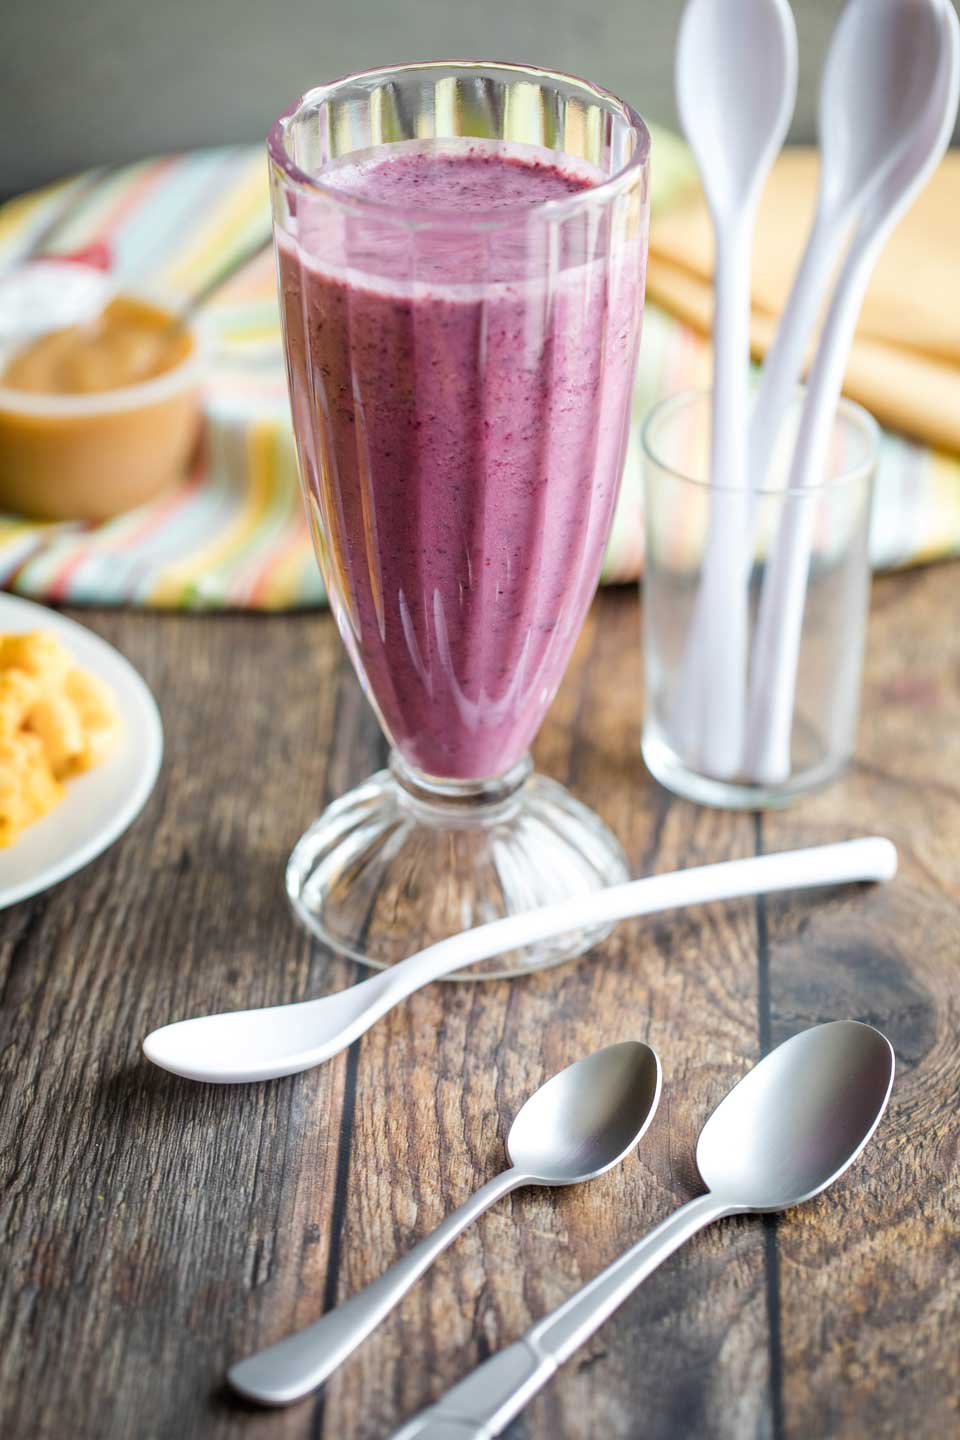 tall glass filled with a blueberry smoothie, surrounded by various sizes of spoons